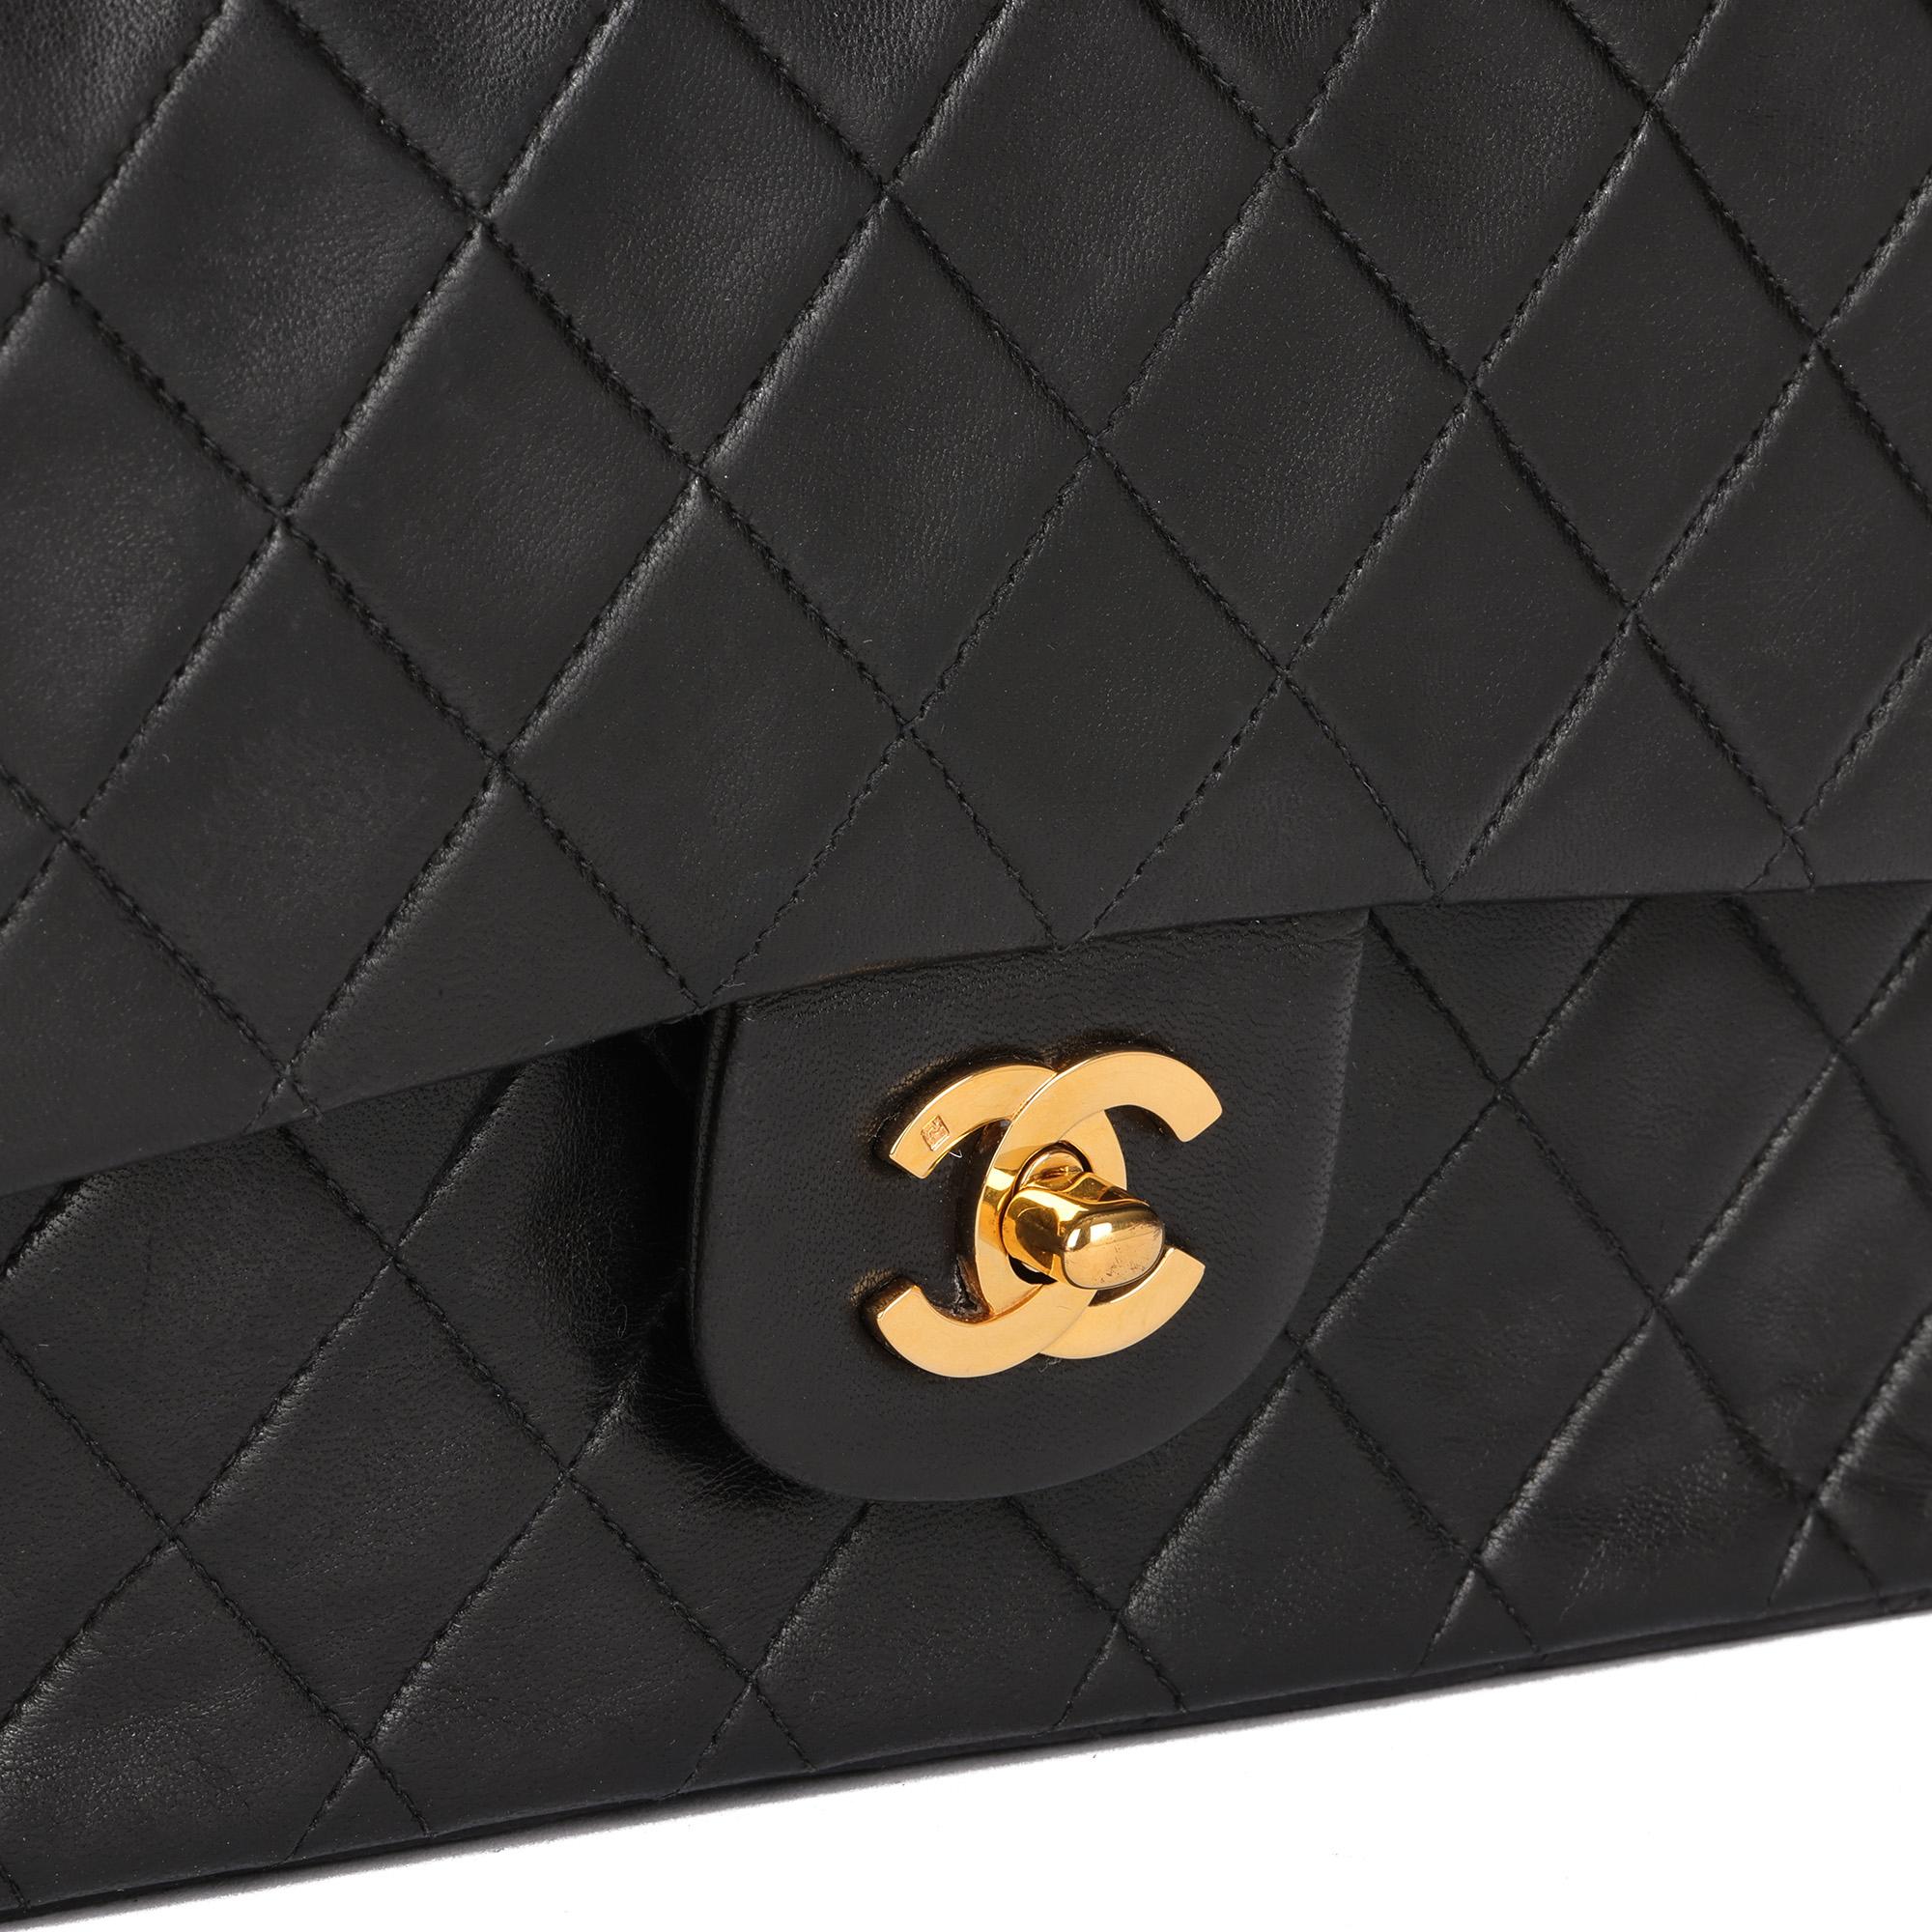 Chanel BLACK QUILTED LAMBSKIN VINTAGE MEDIUM CLASSIC DOUBLE FLAP BAG 2